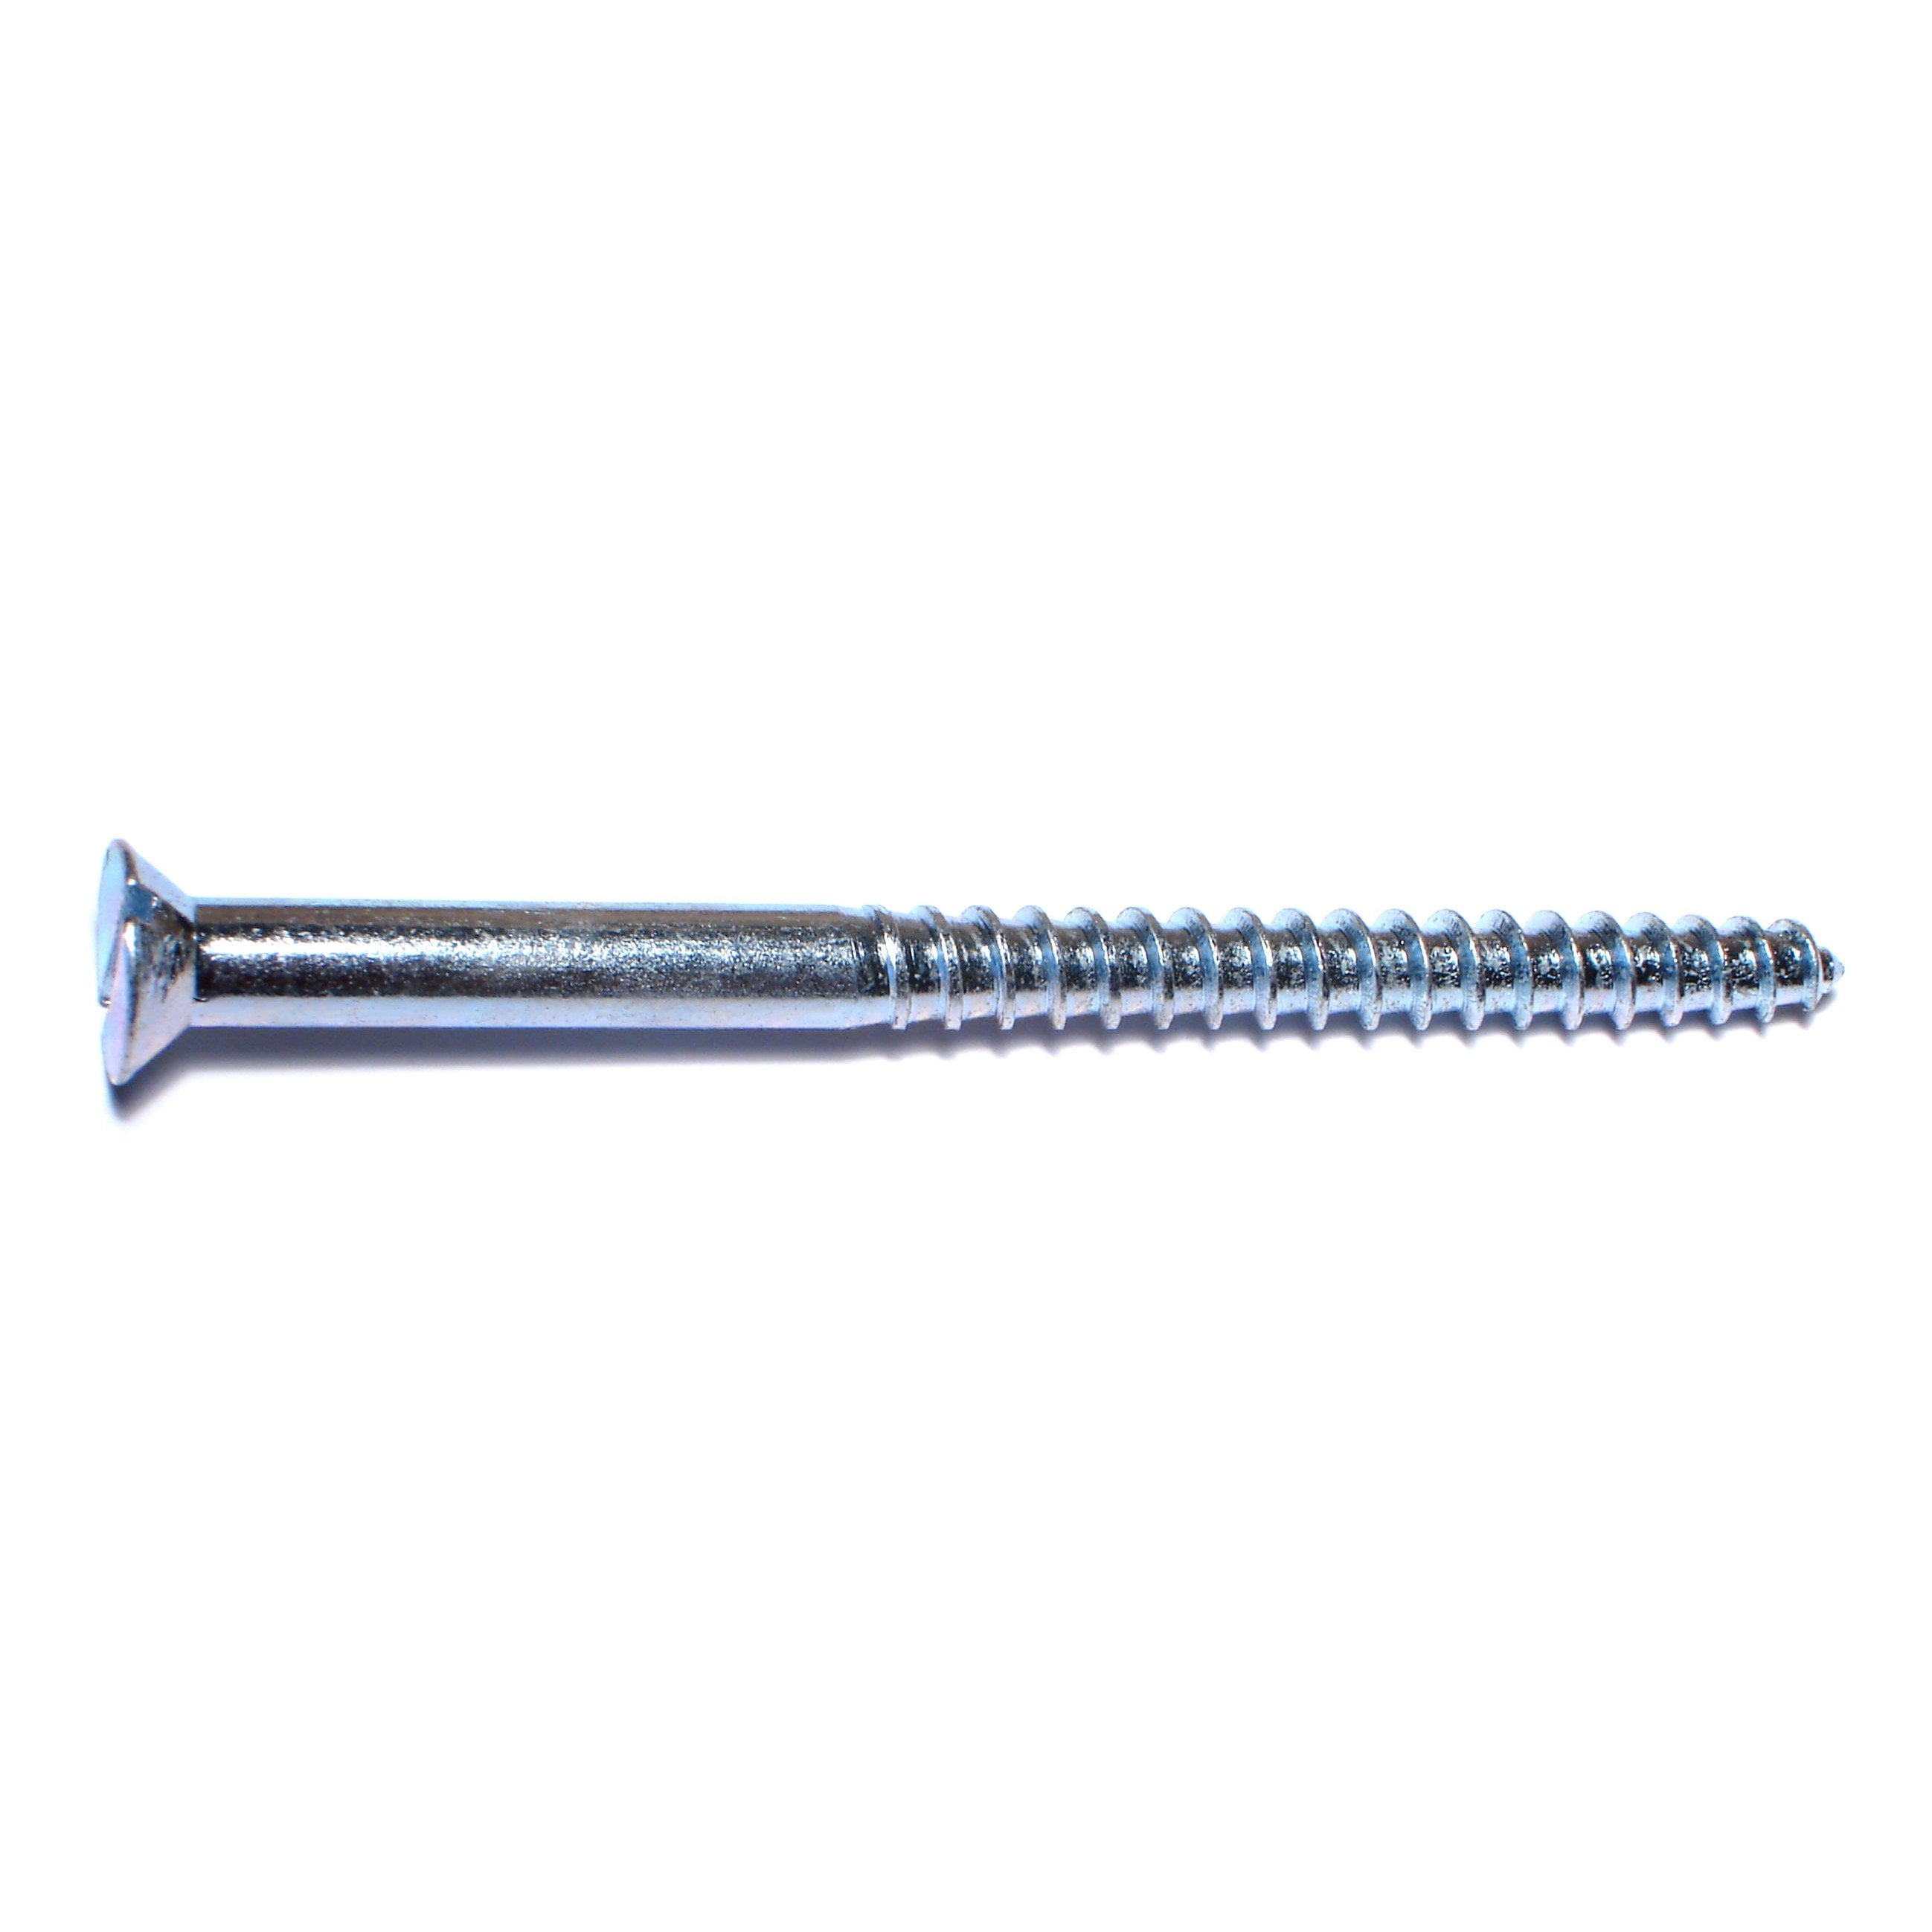 #6 x 1 1/2" Wood Screw Slotted Flat Head Low Carbon Steel Zinc Plated 